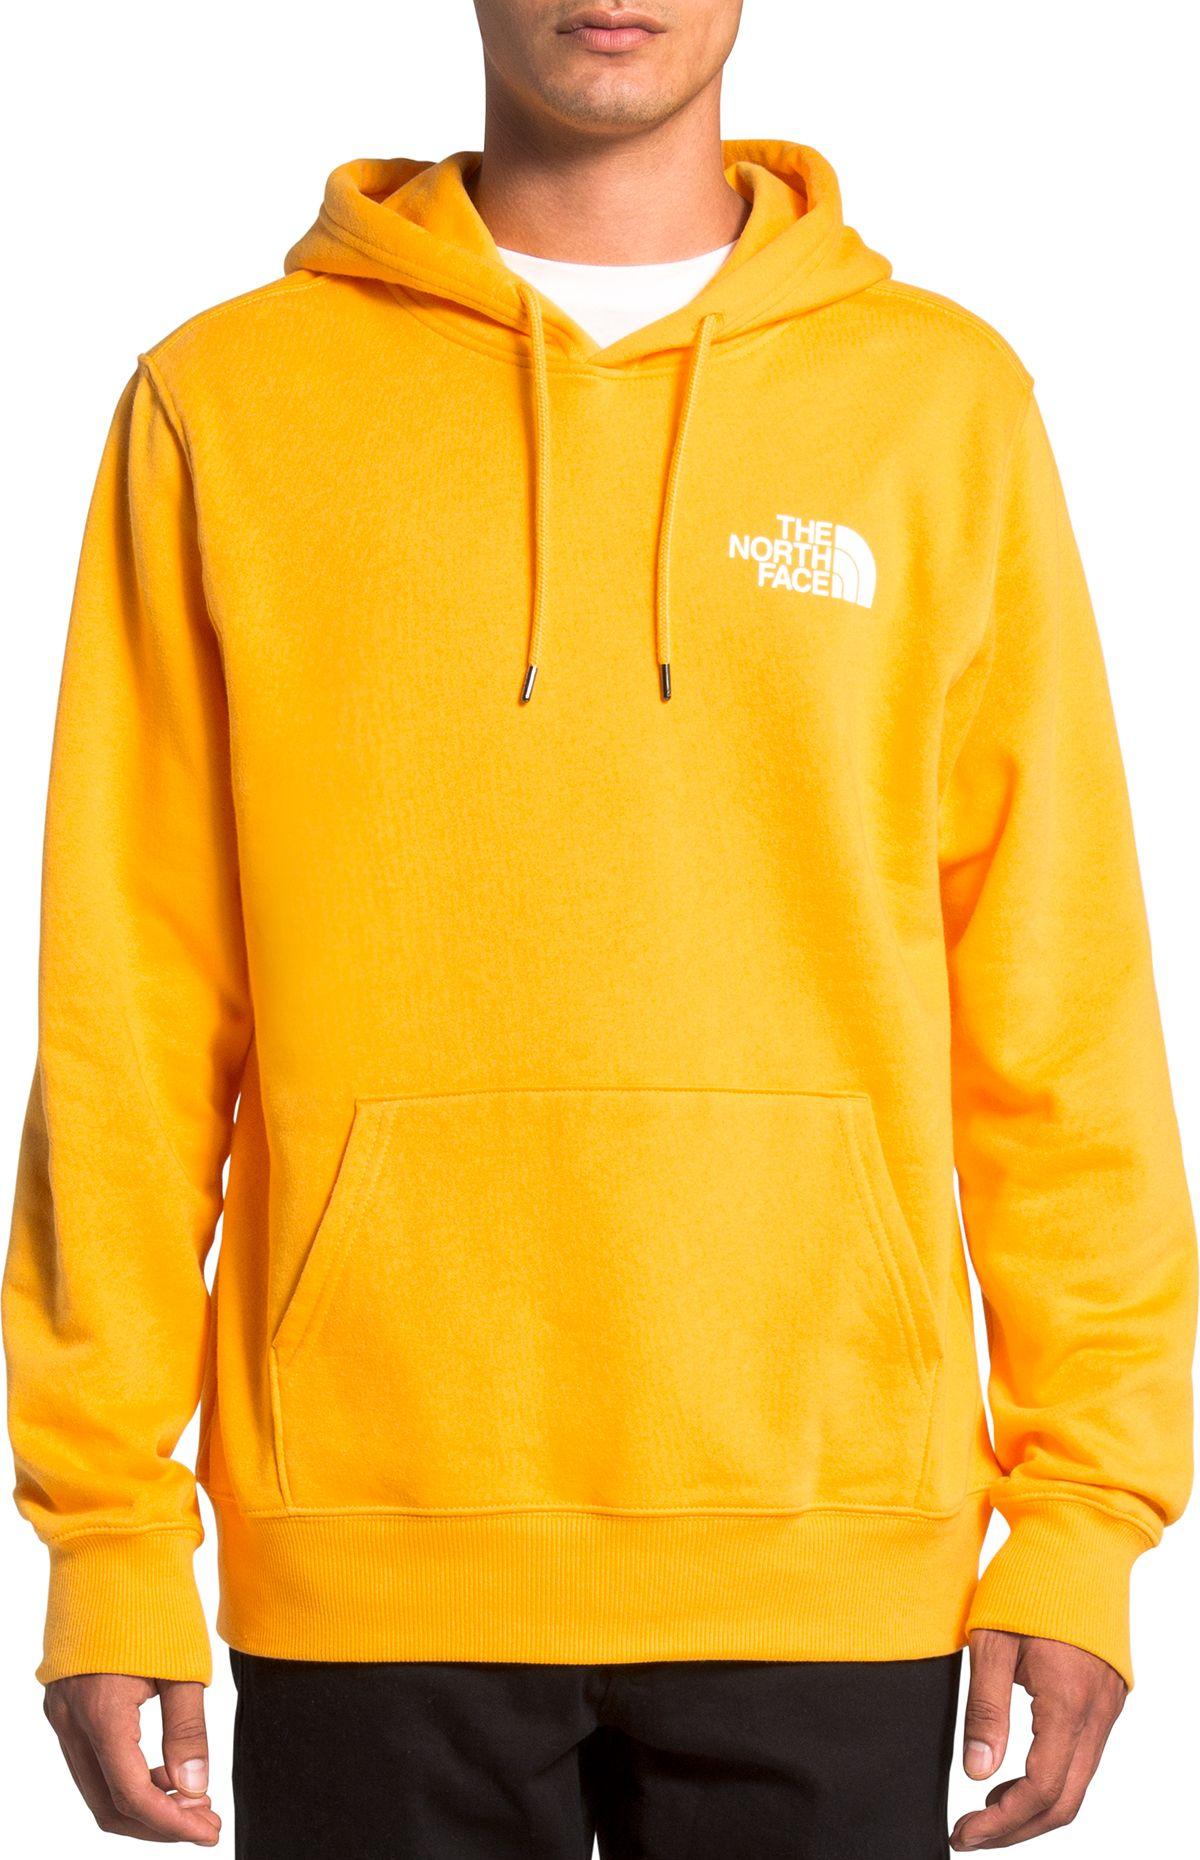 The North Face Box Nse Pullover Hoodie in Yellow for Men - Lyst